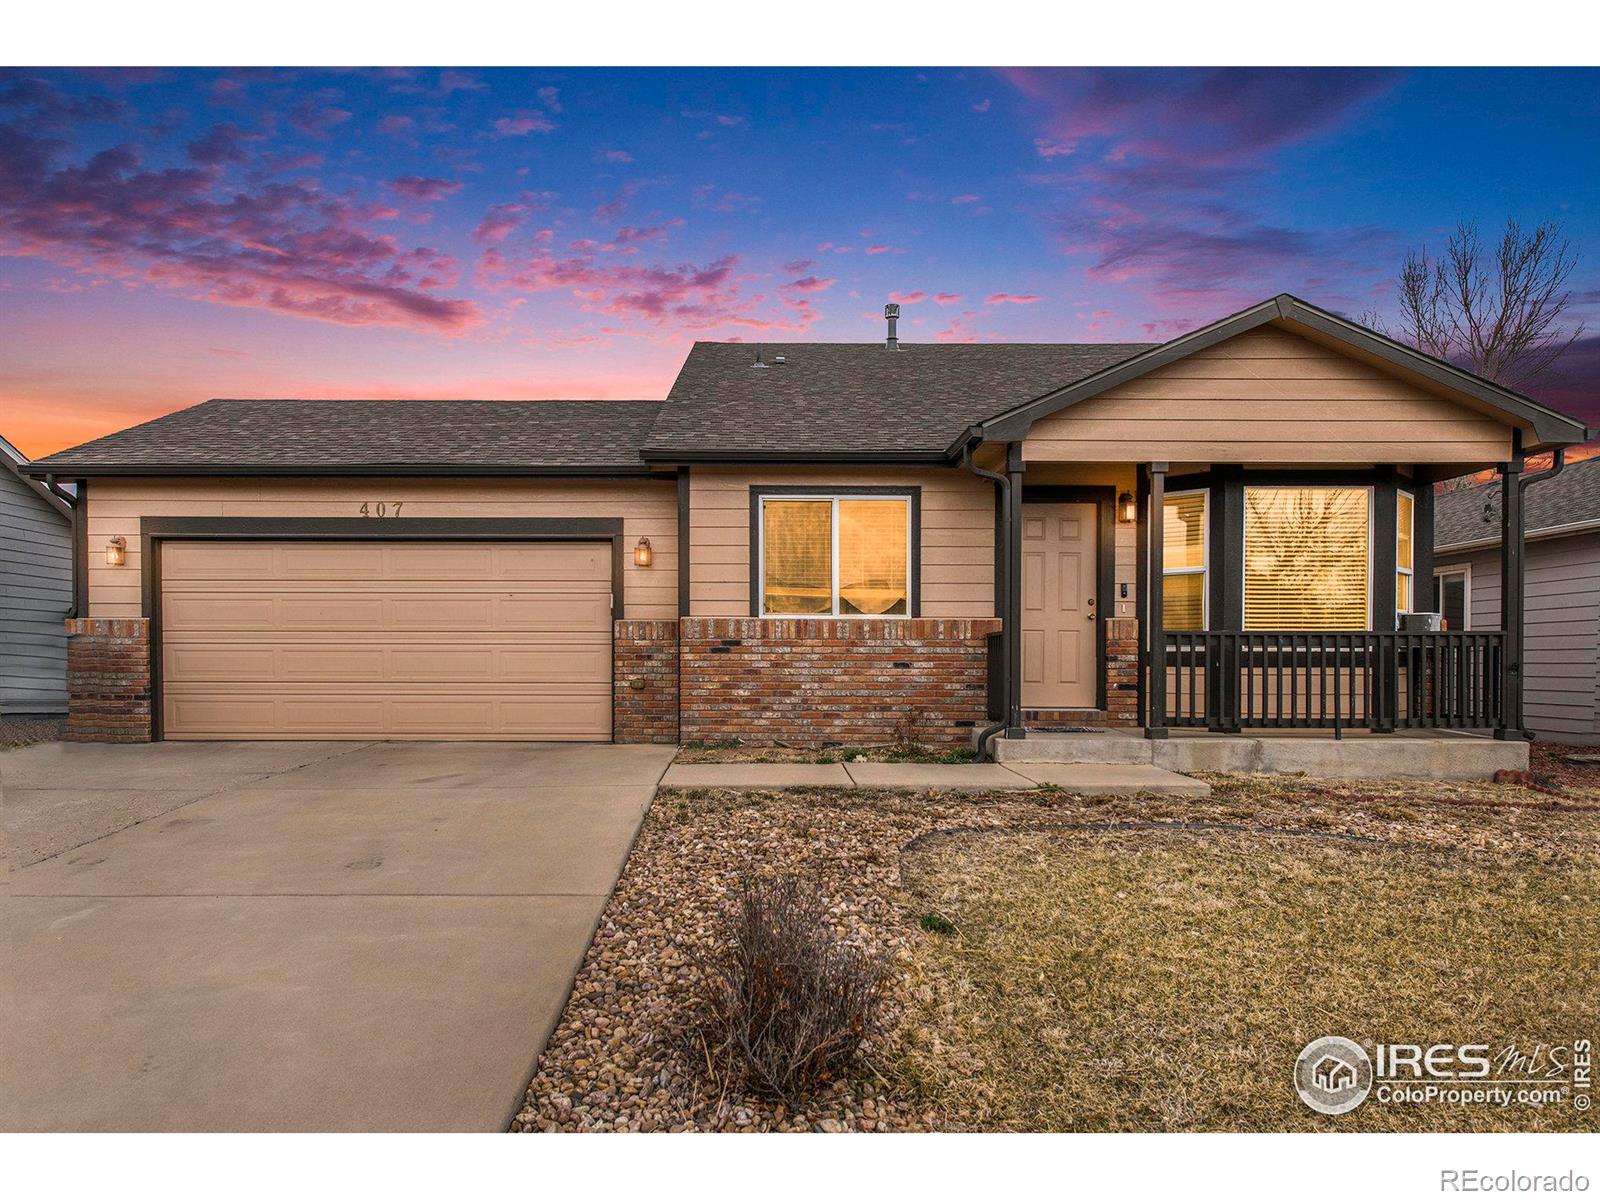 407 E 28th St Dr, greeley MLS: 4567891005045 Beds: 3 Baths: 1 Price: $339,000